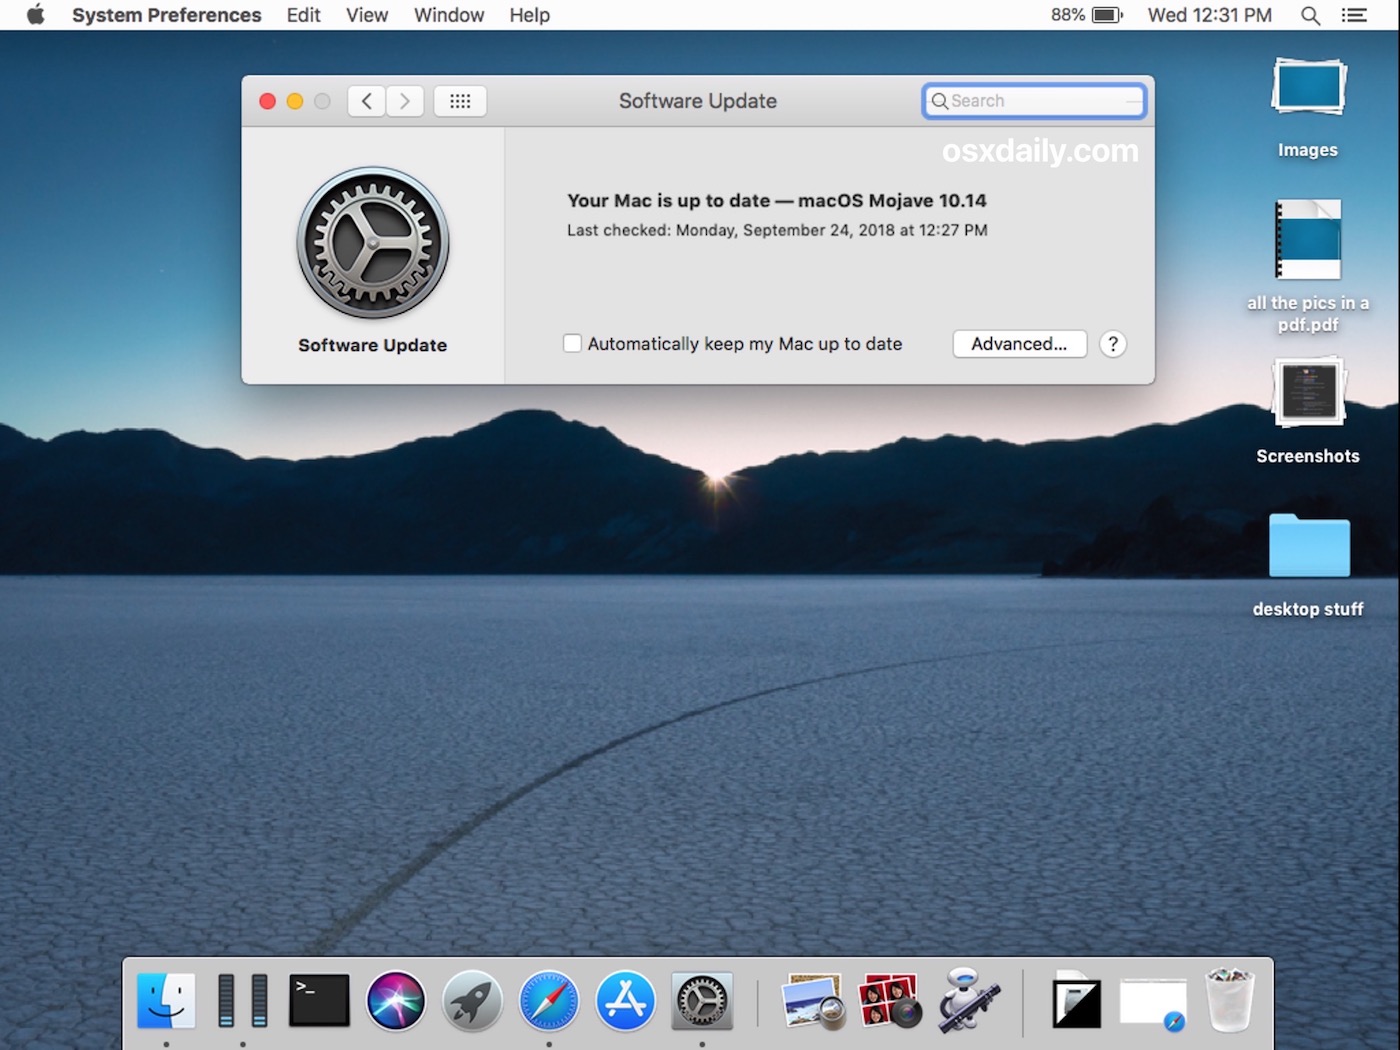 Update For Mac Os X Verssion 10.6.8